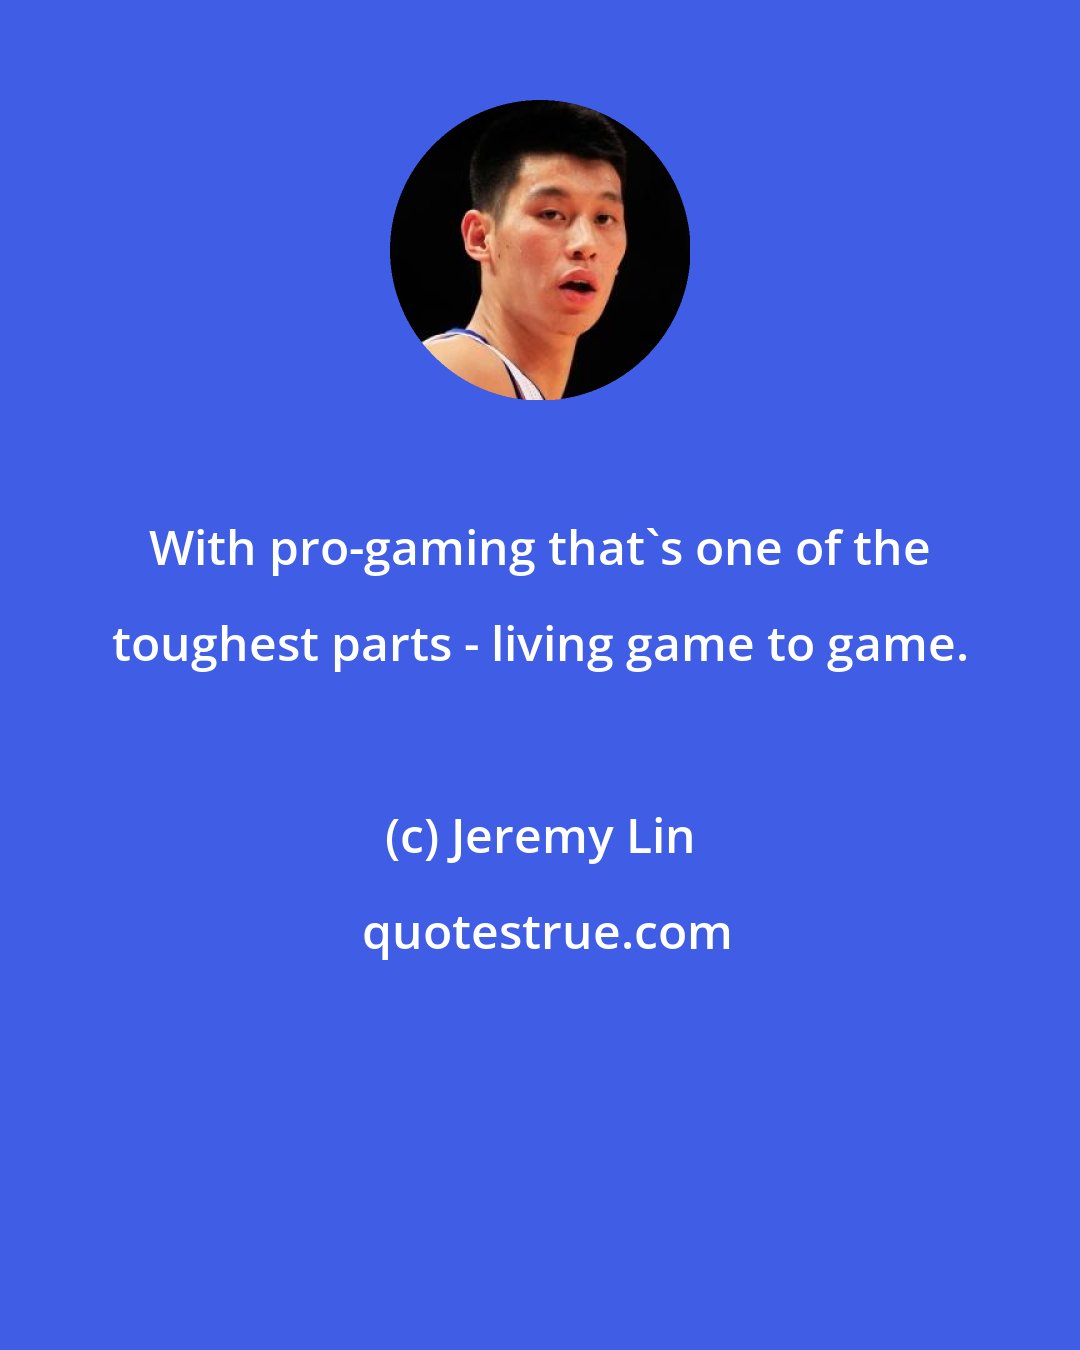 Jeremy Lin: With pro-gaming that's one of the toughest parts - living game to game.